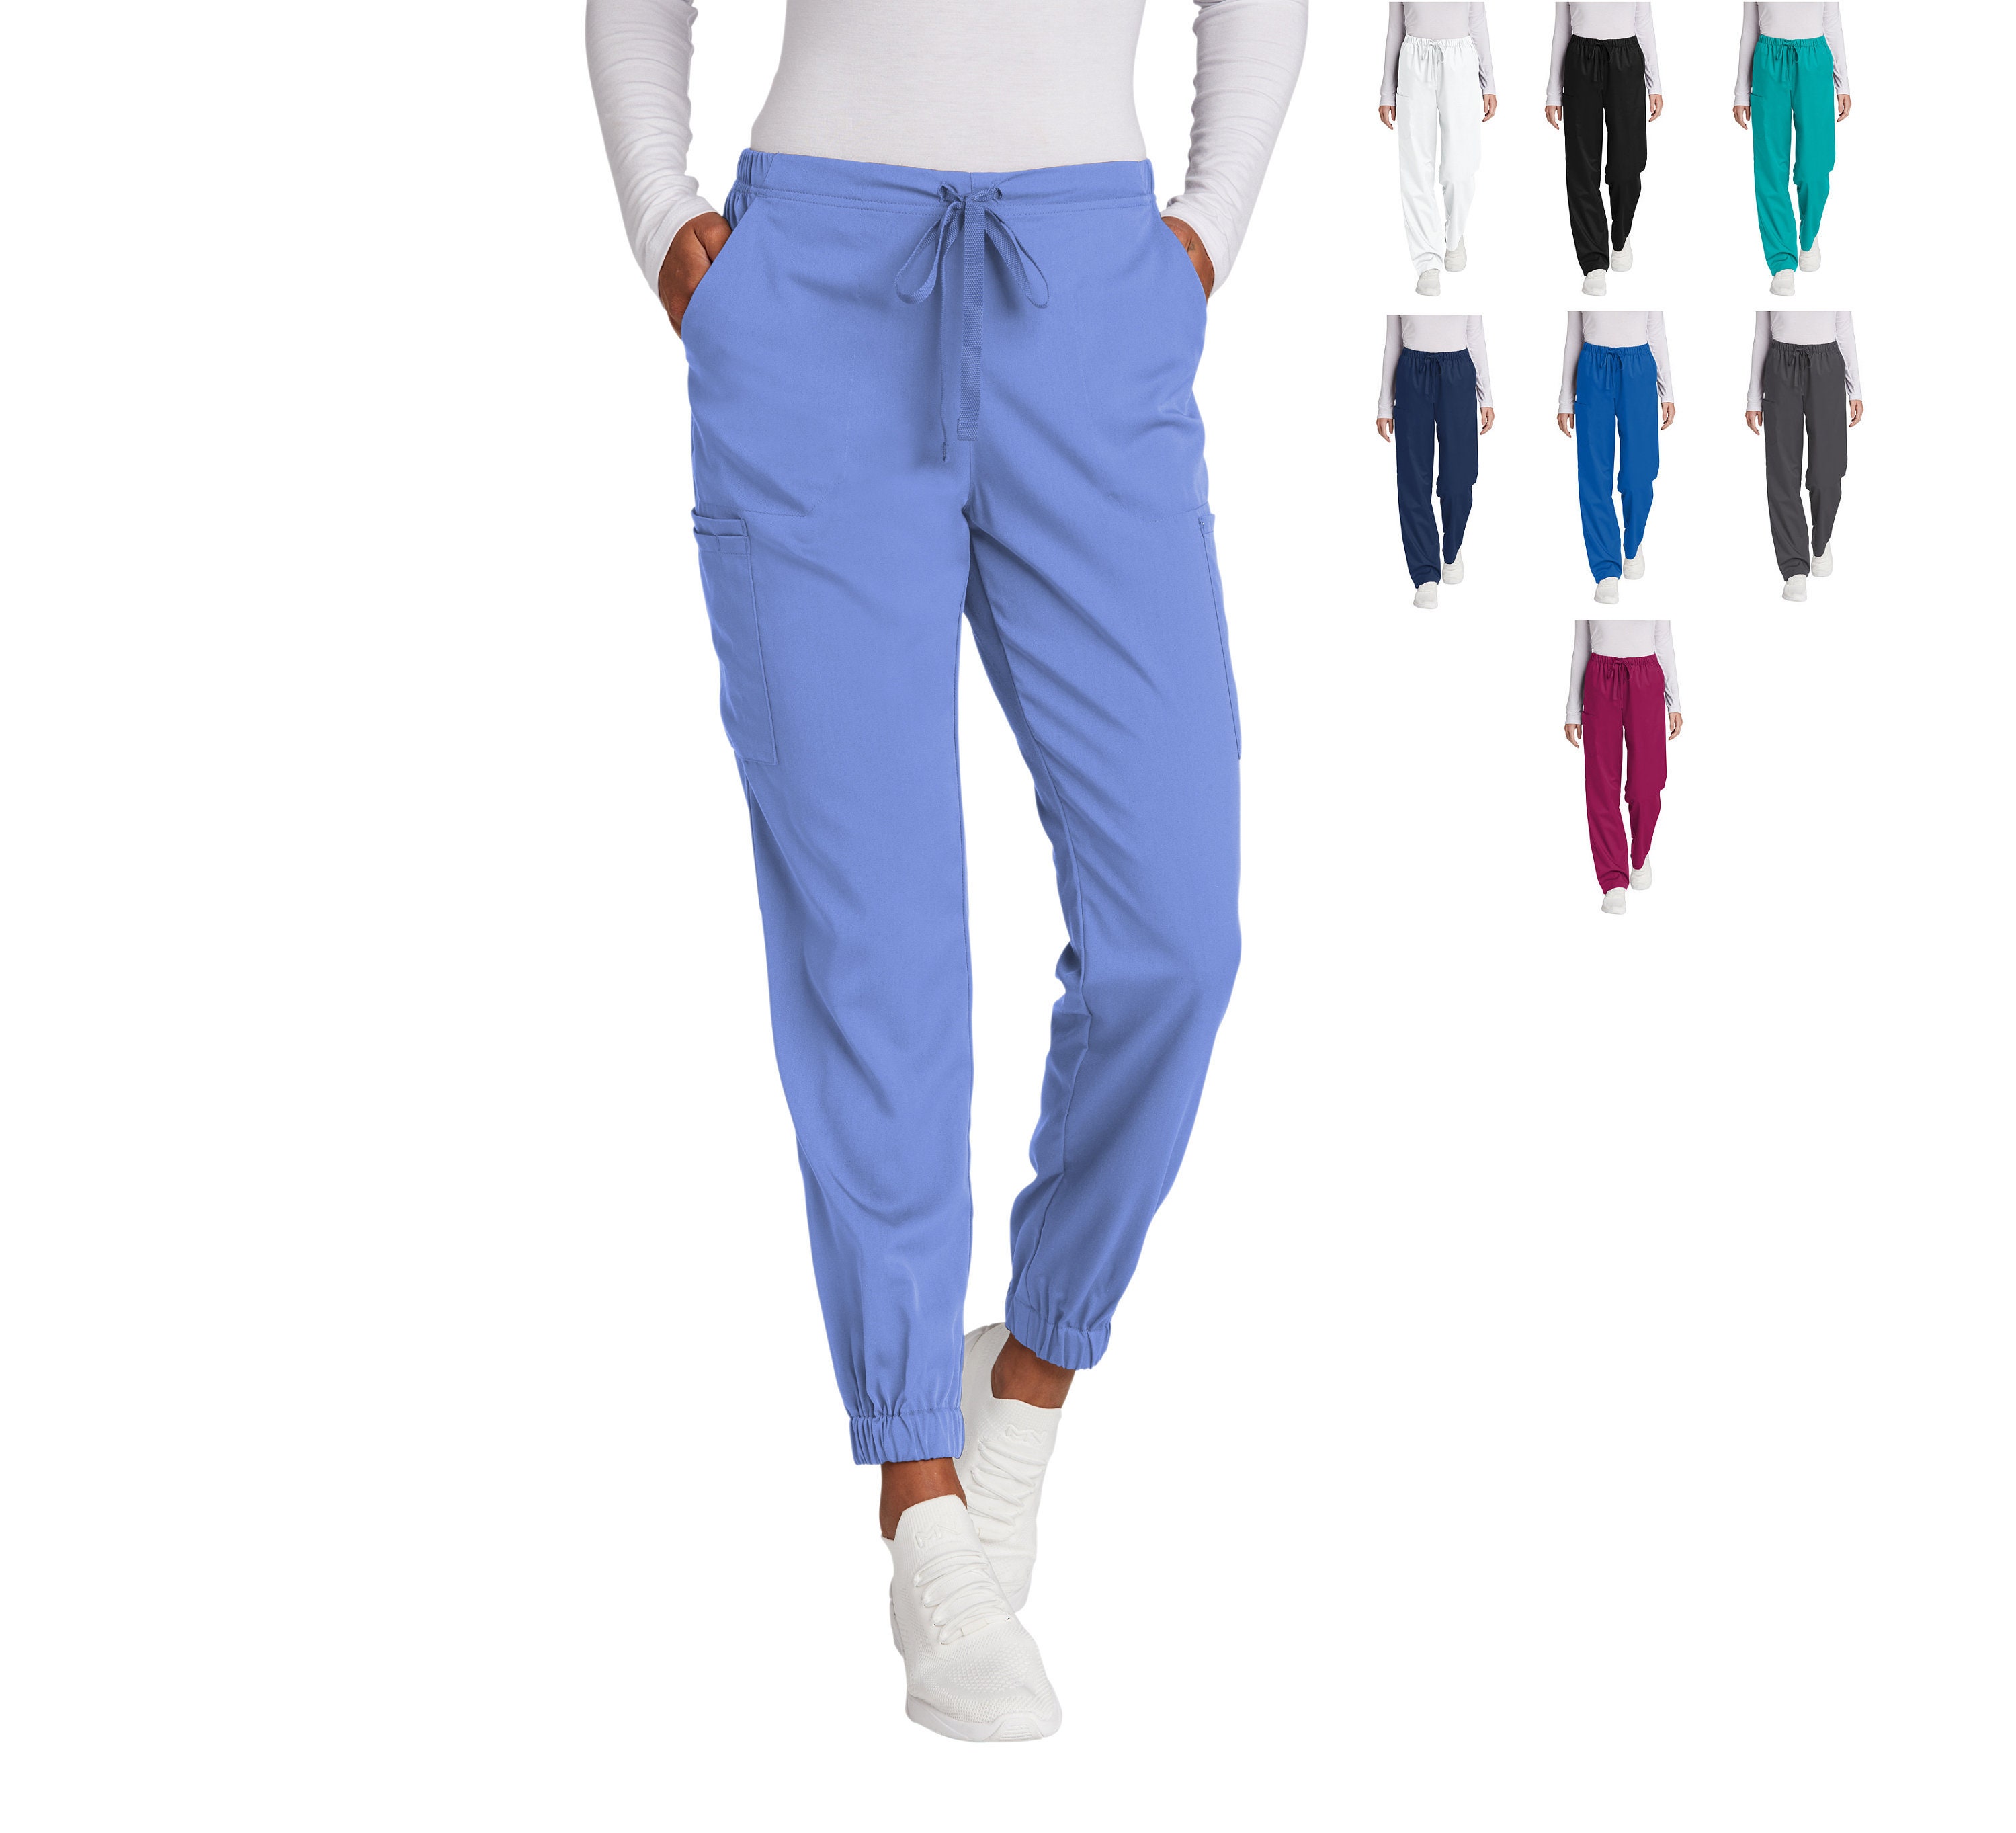 Discover more than 85 scrub pants with elastic ankles - in.eteachers